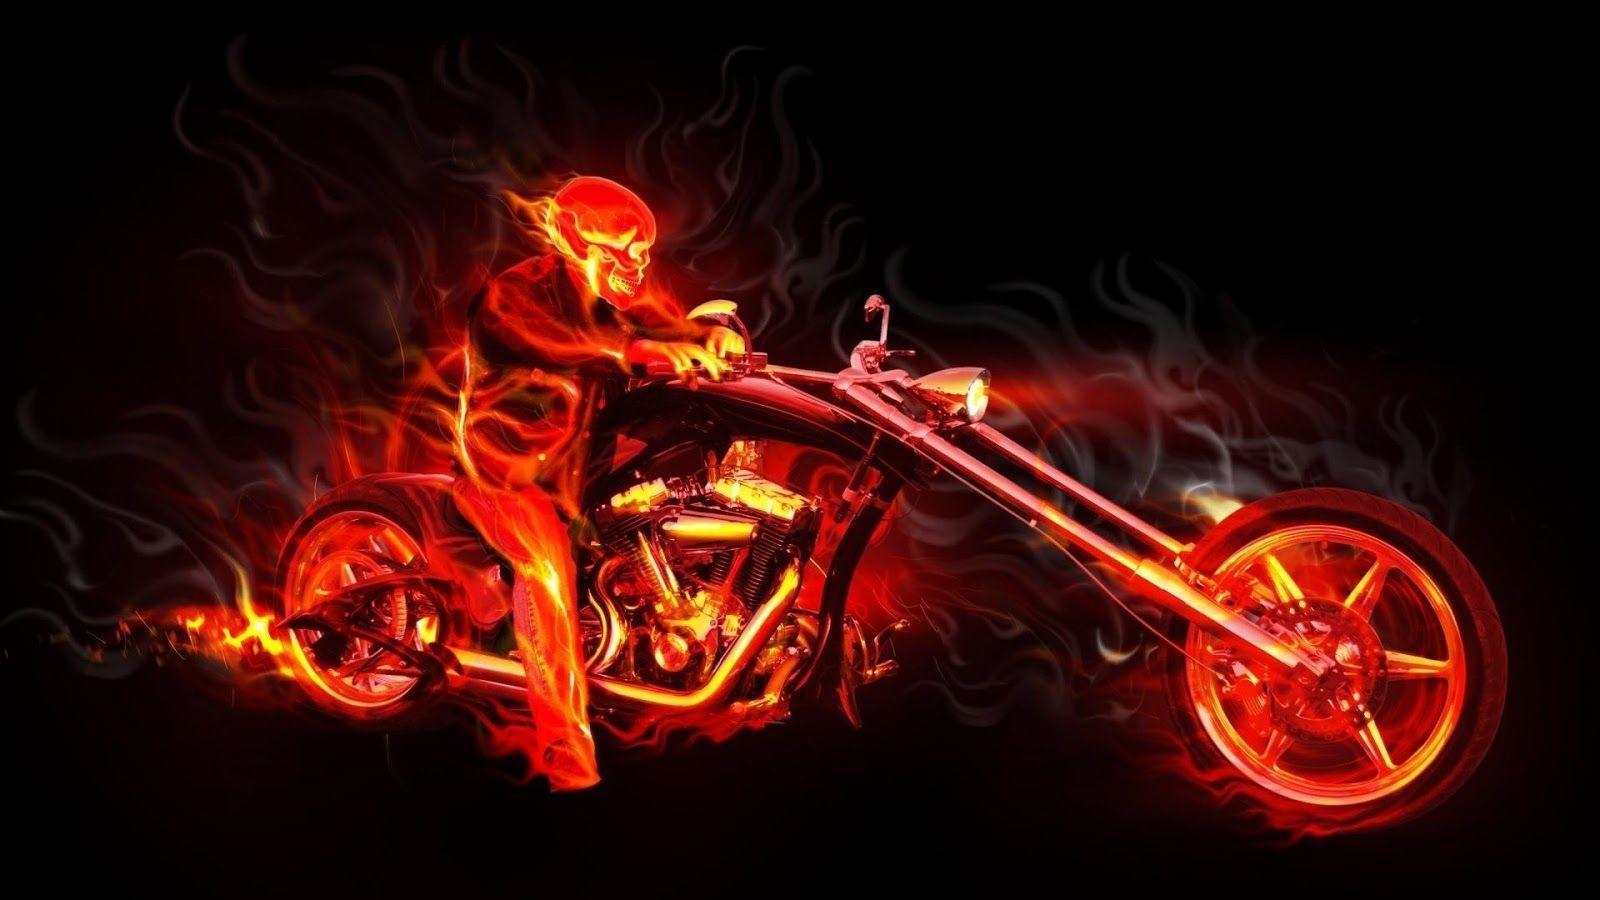 Blue And Red Flaming Skulls. File Name, Motorcycle Skull